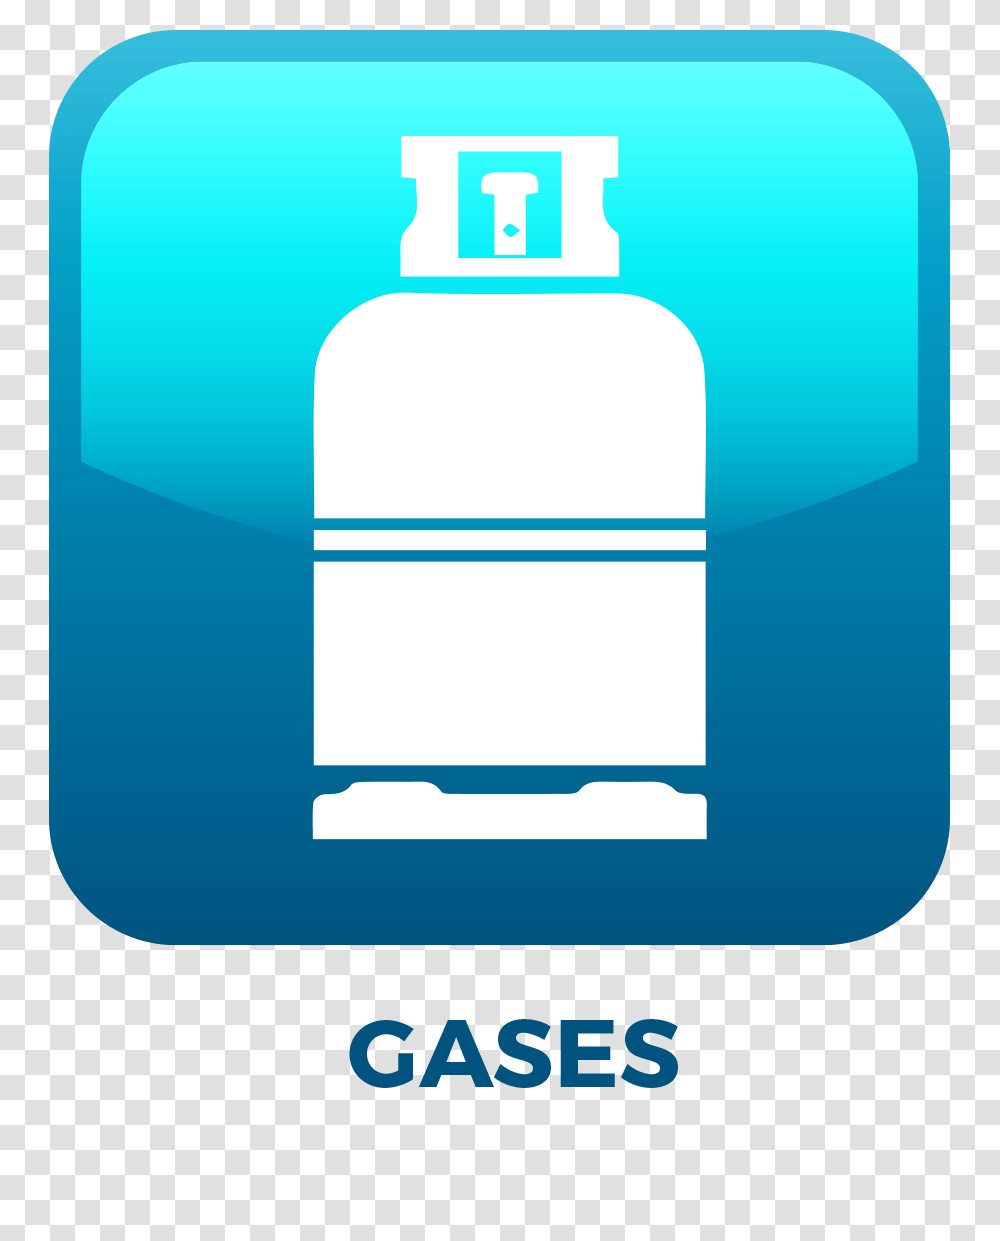 Manage The Cost Of Gases Expense Reduction, First Aid, Medication, Security, Logo Transparent Png